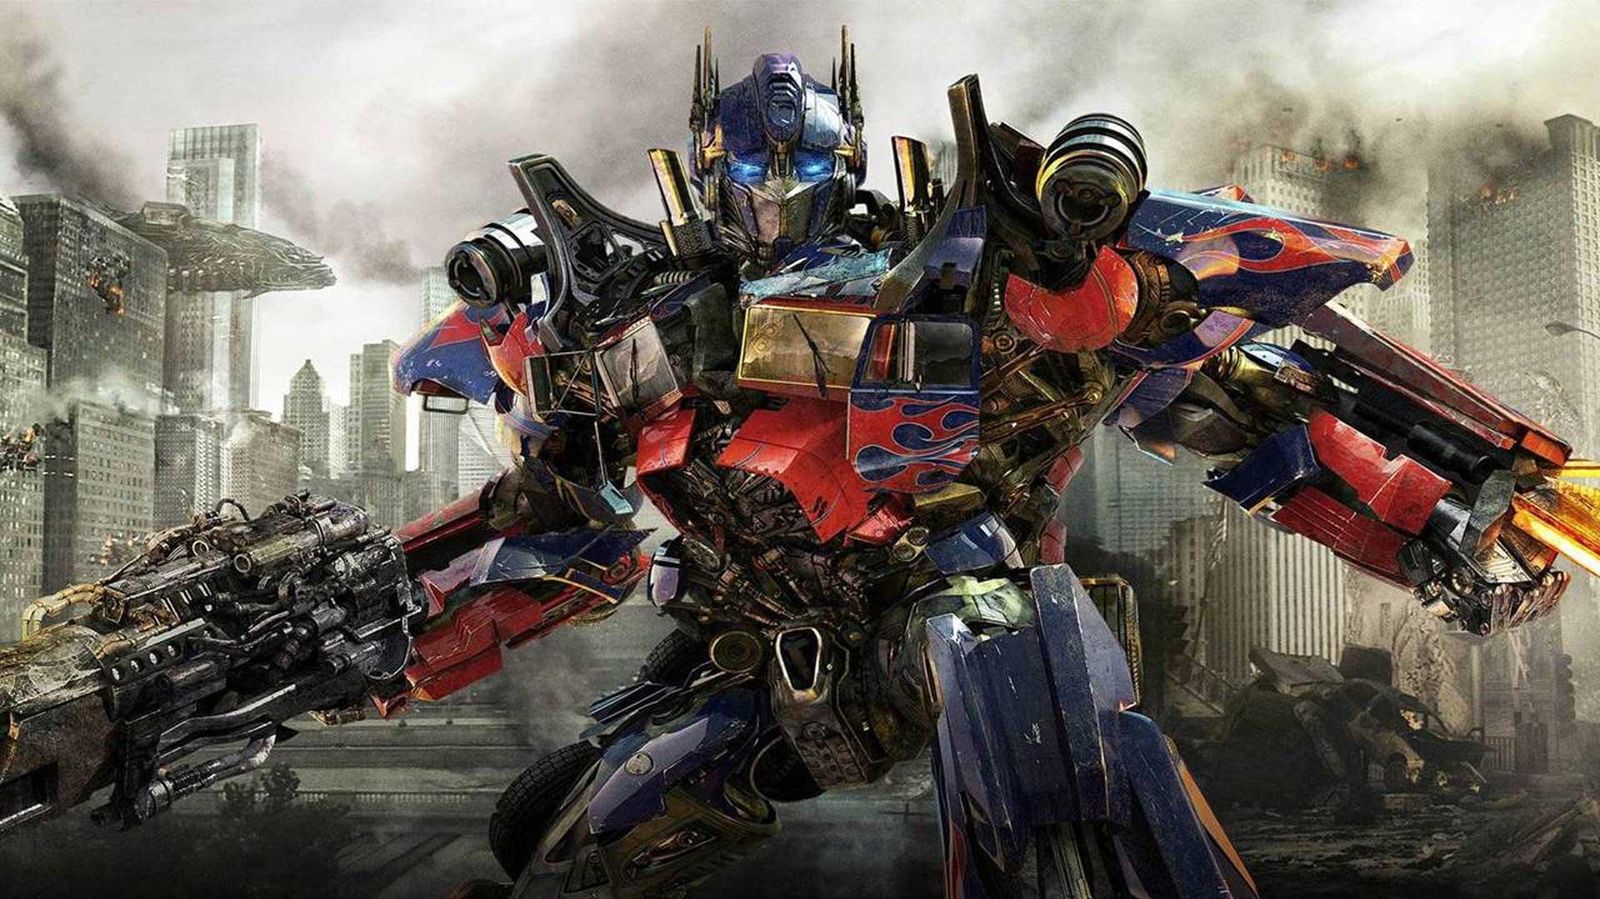 Release Dates Of Next Three Instalments Of ‘Transformers’ Revealed